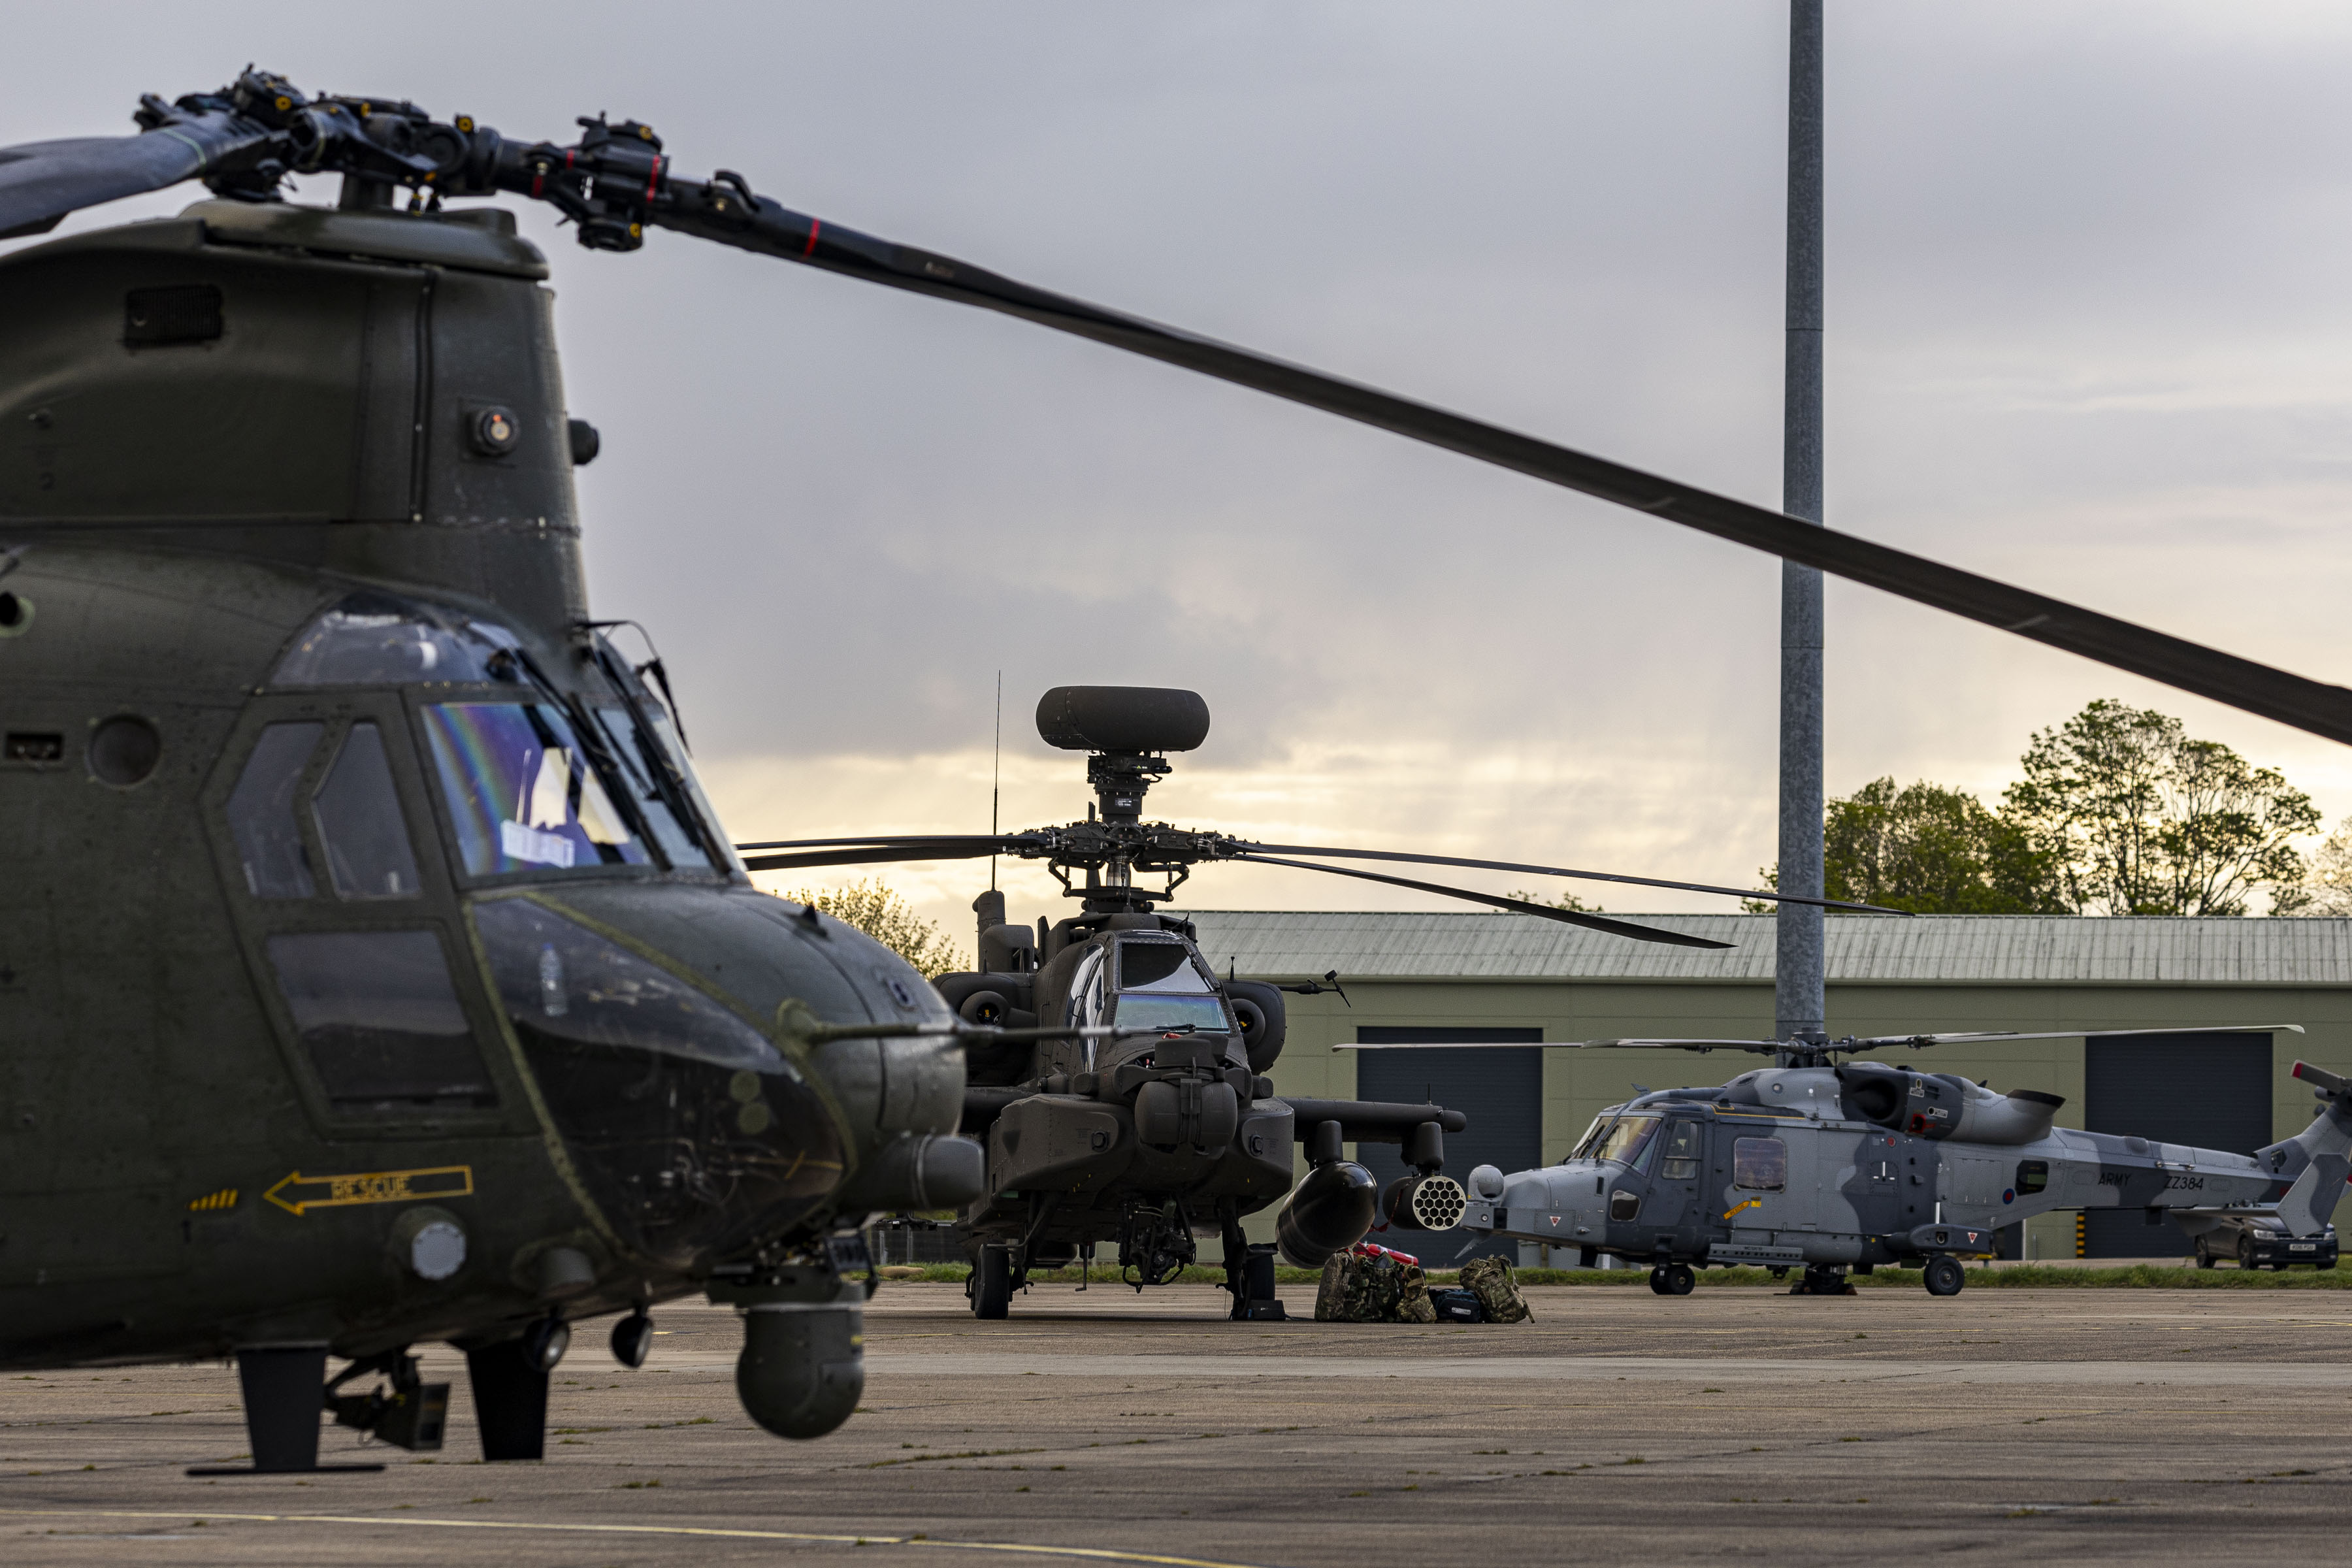 Image shows Chinook, Apache and Wildcat helicopters.